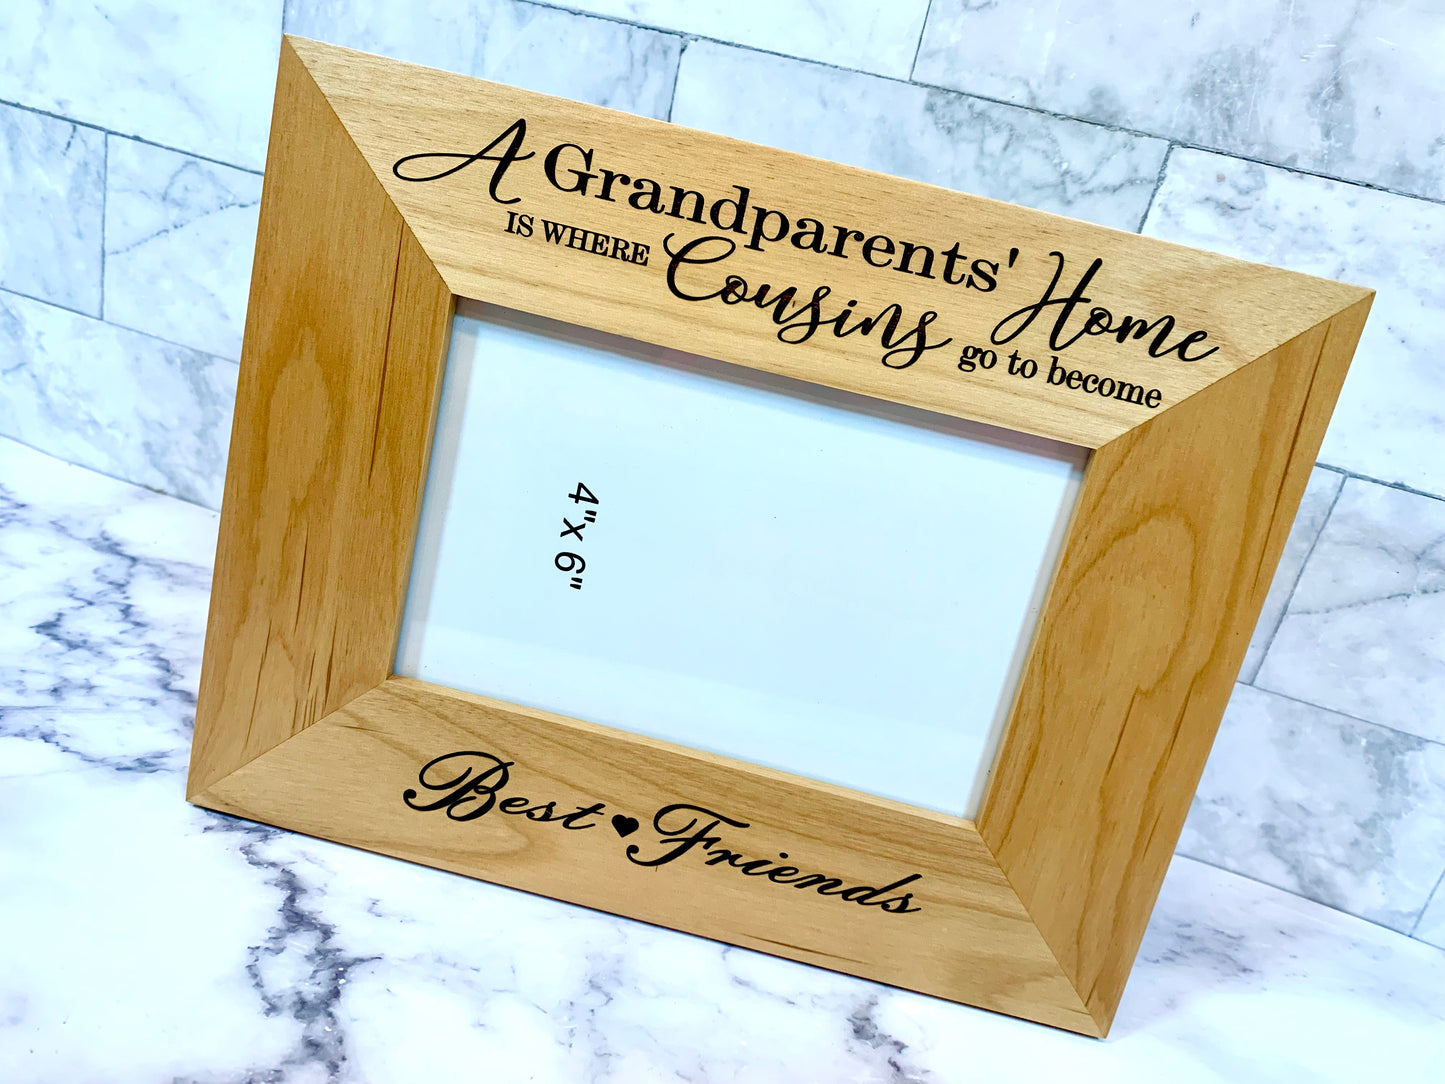 A Grandparents House Is Where Cousins Go To Become Best Friends Picture Frame/Custom Personalized Home Decor/Gifts For Grandma/Gifts For Her